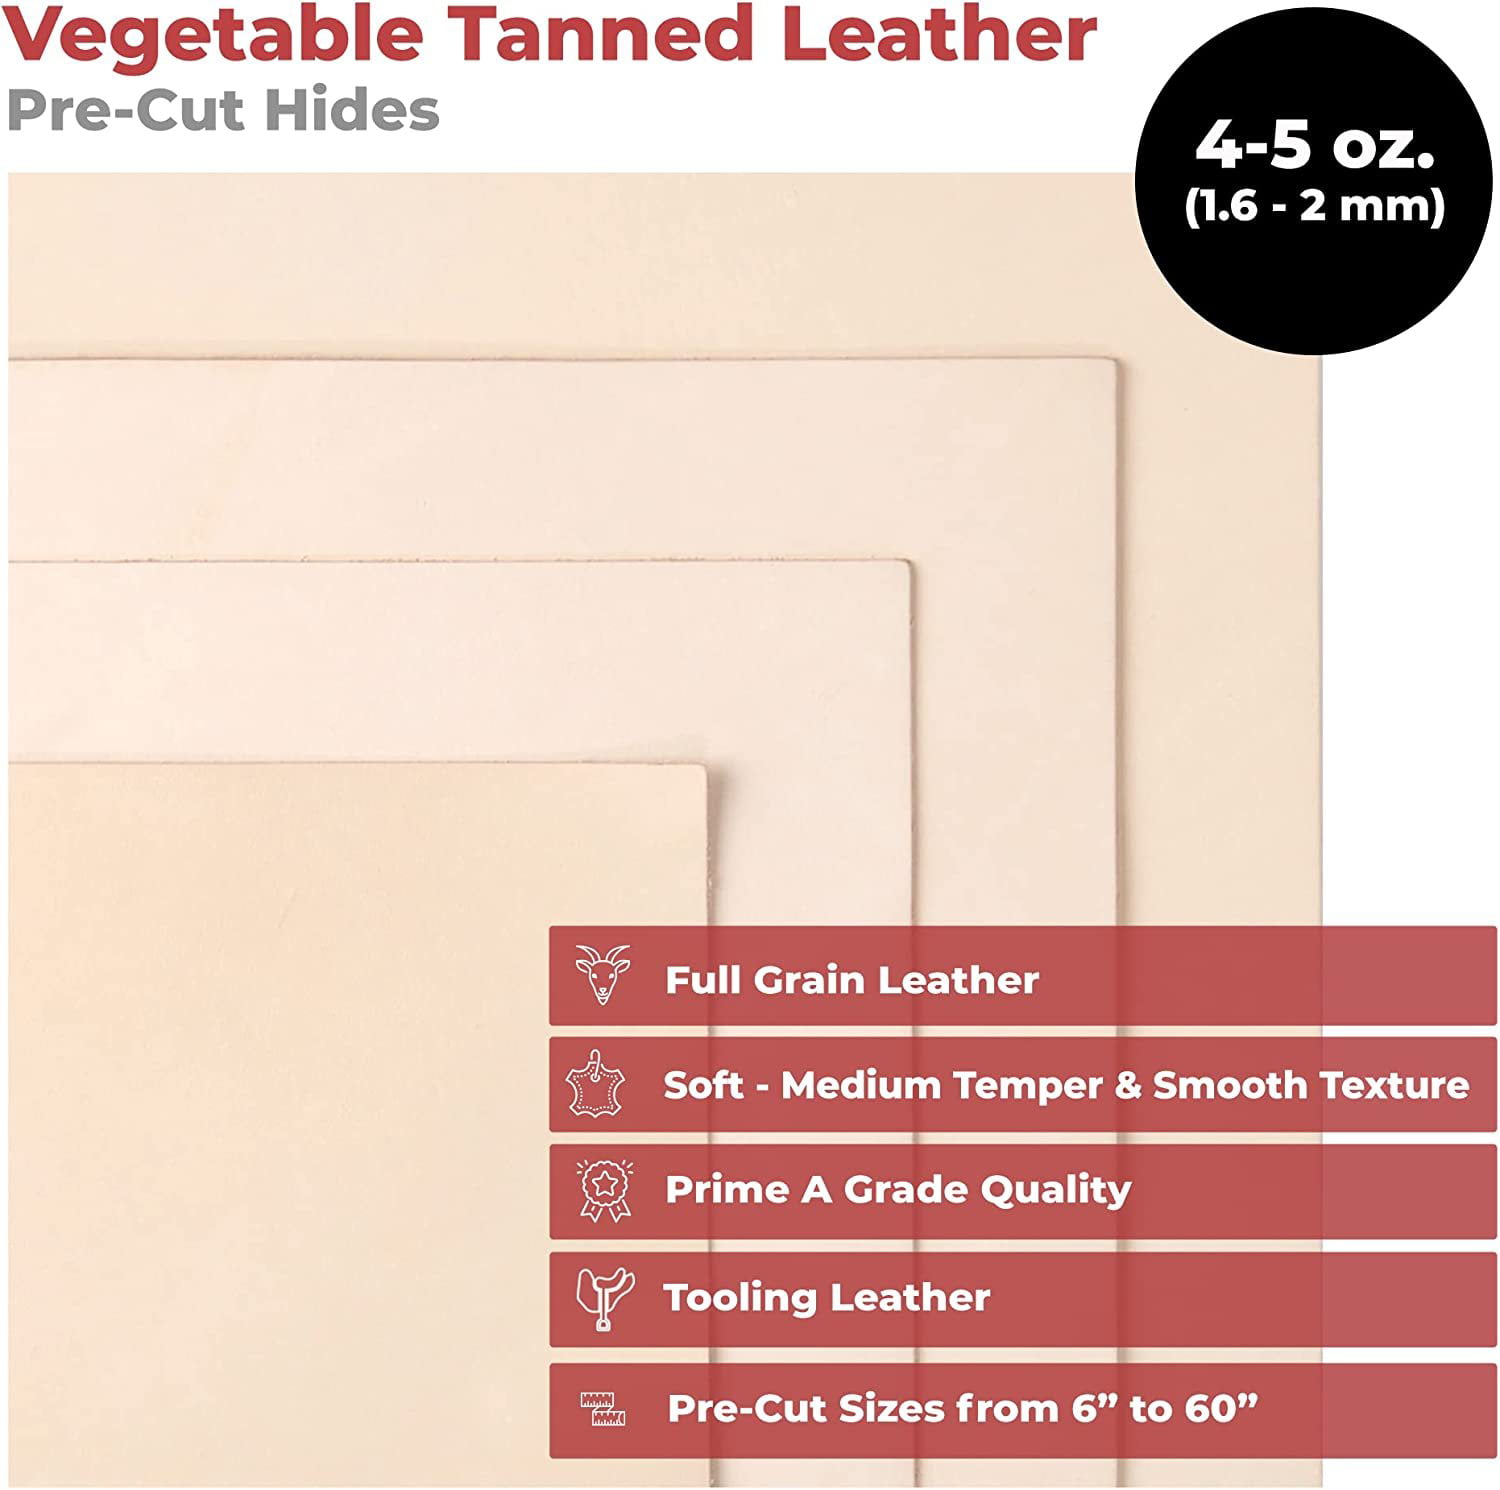 Vegetable Tanned Tooling Leather Pack of 2 Cowhide Leather Sheet 1.6-2.0mm 4 x 4 CP 4-5 oz Leather Hide 